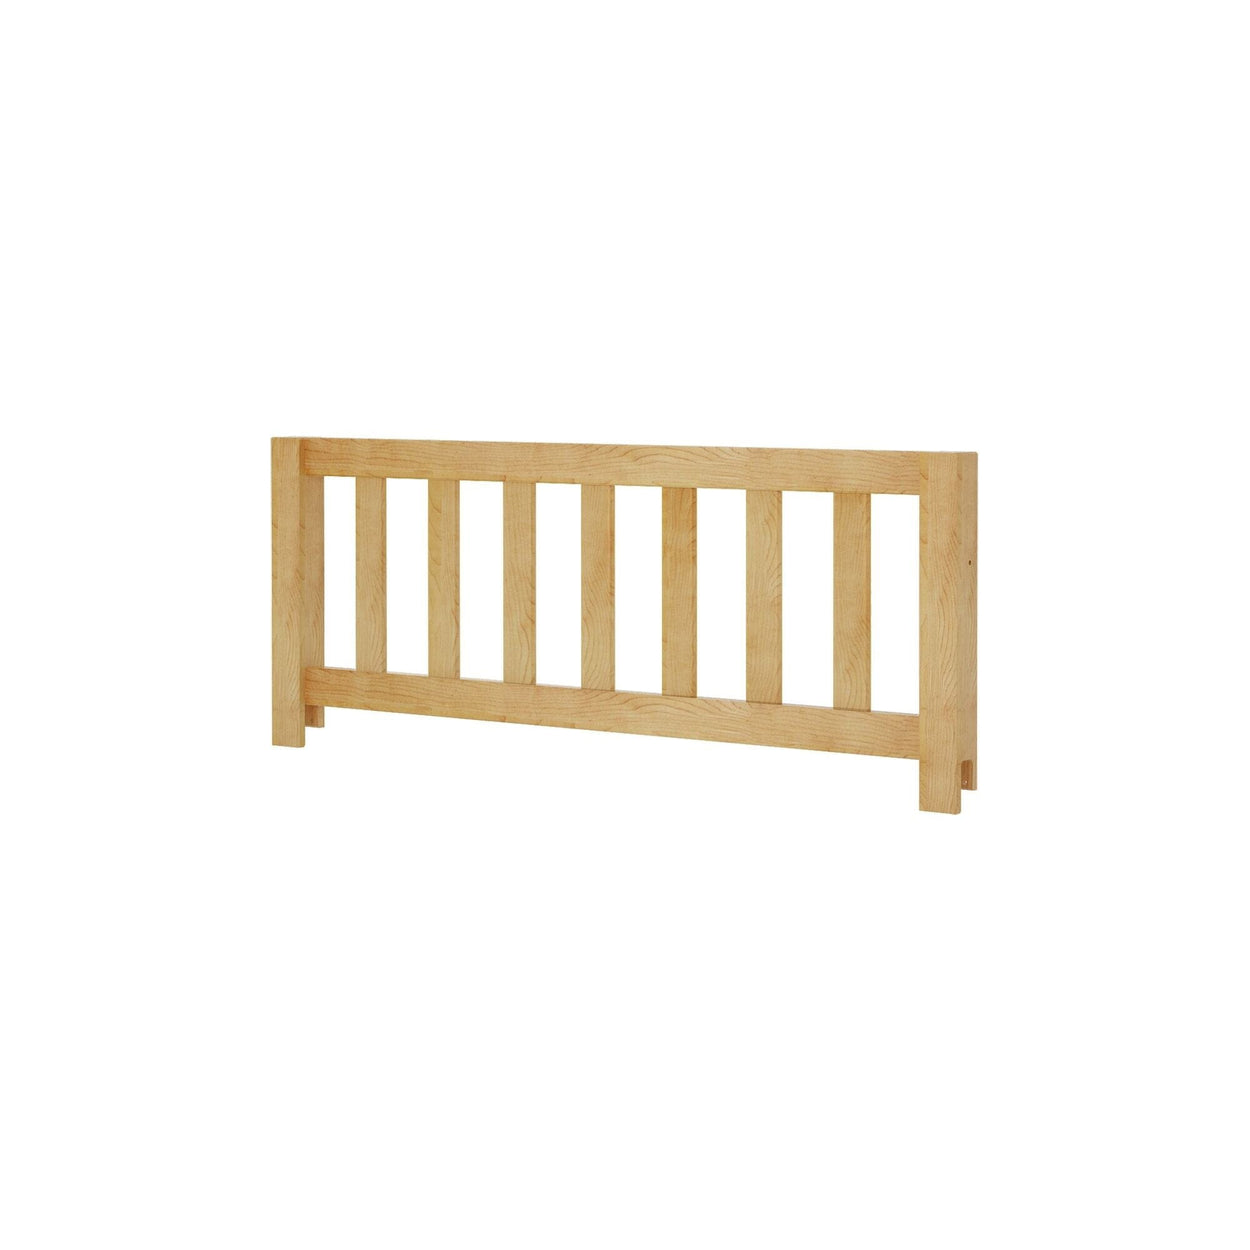 177209-001 : Component Safety Guard Rail, Natural